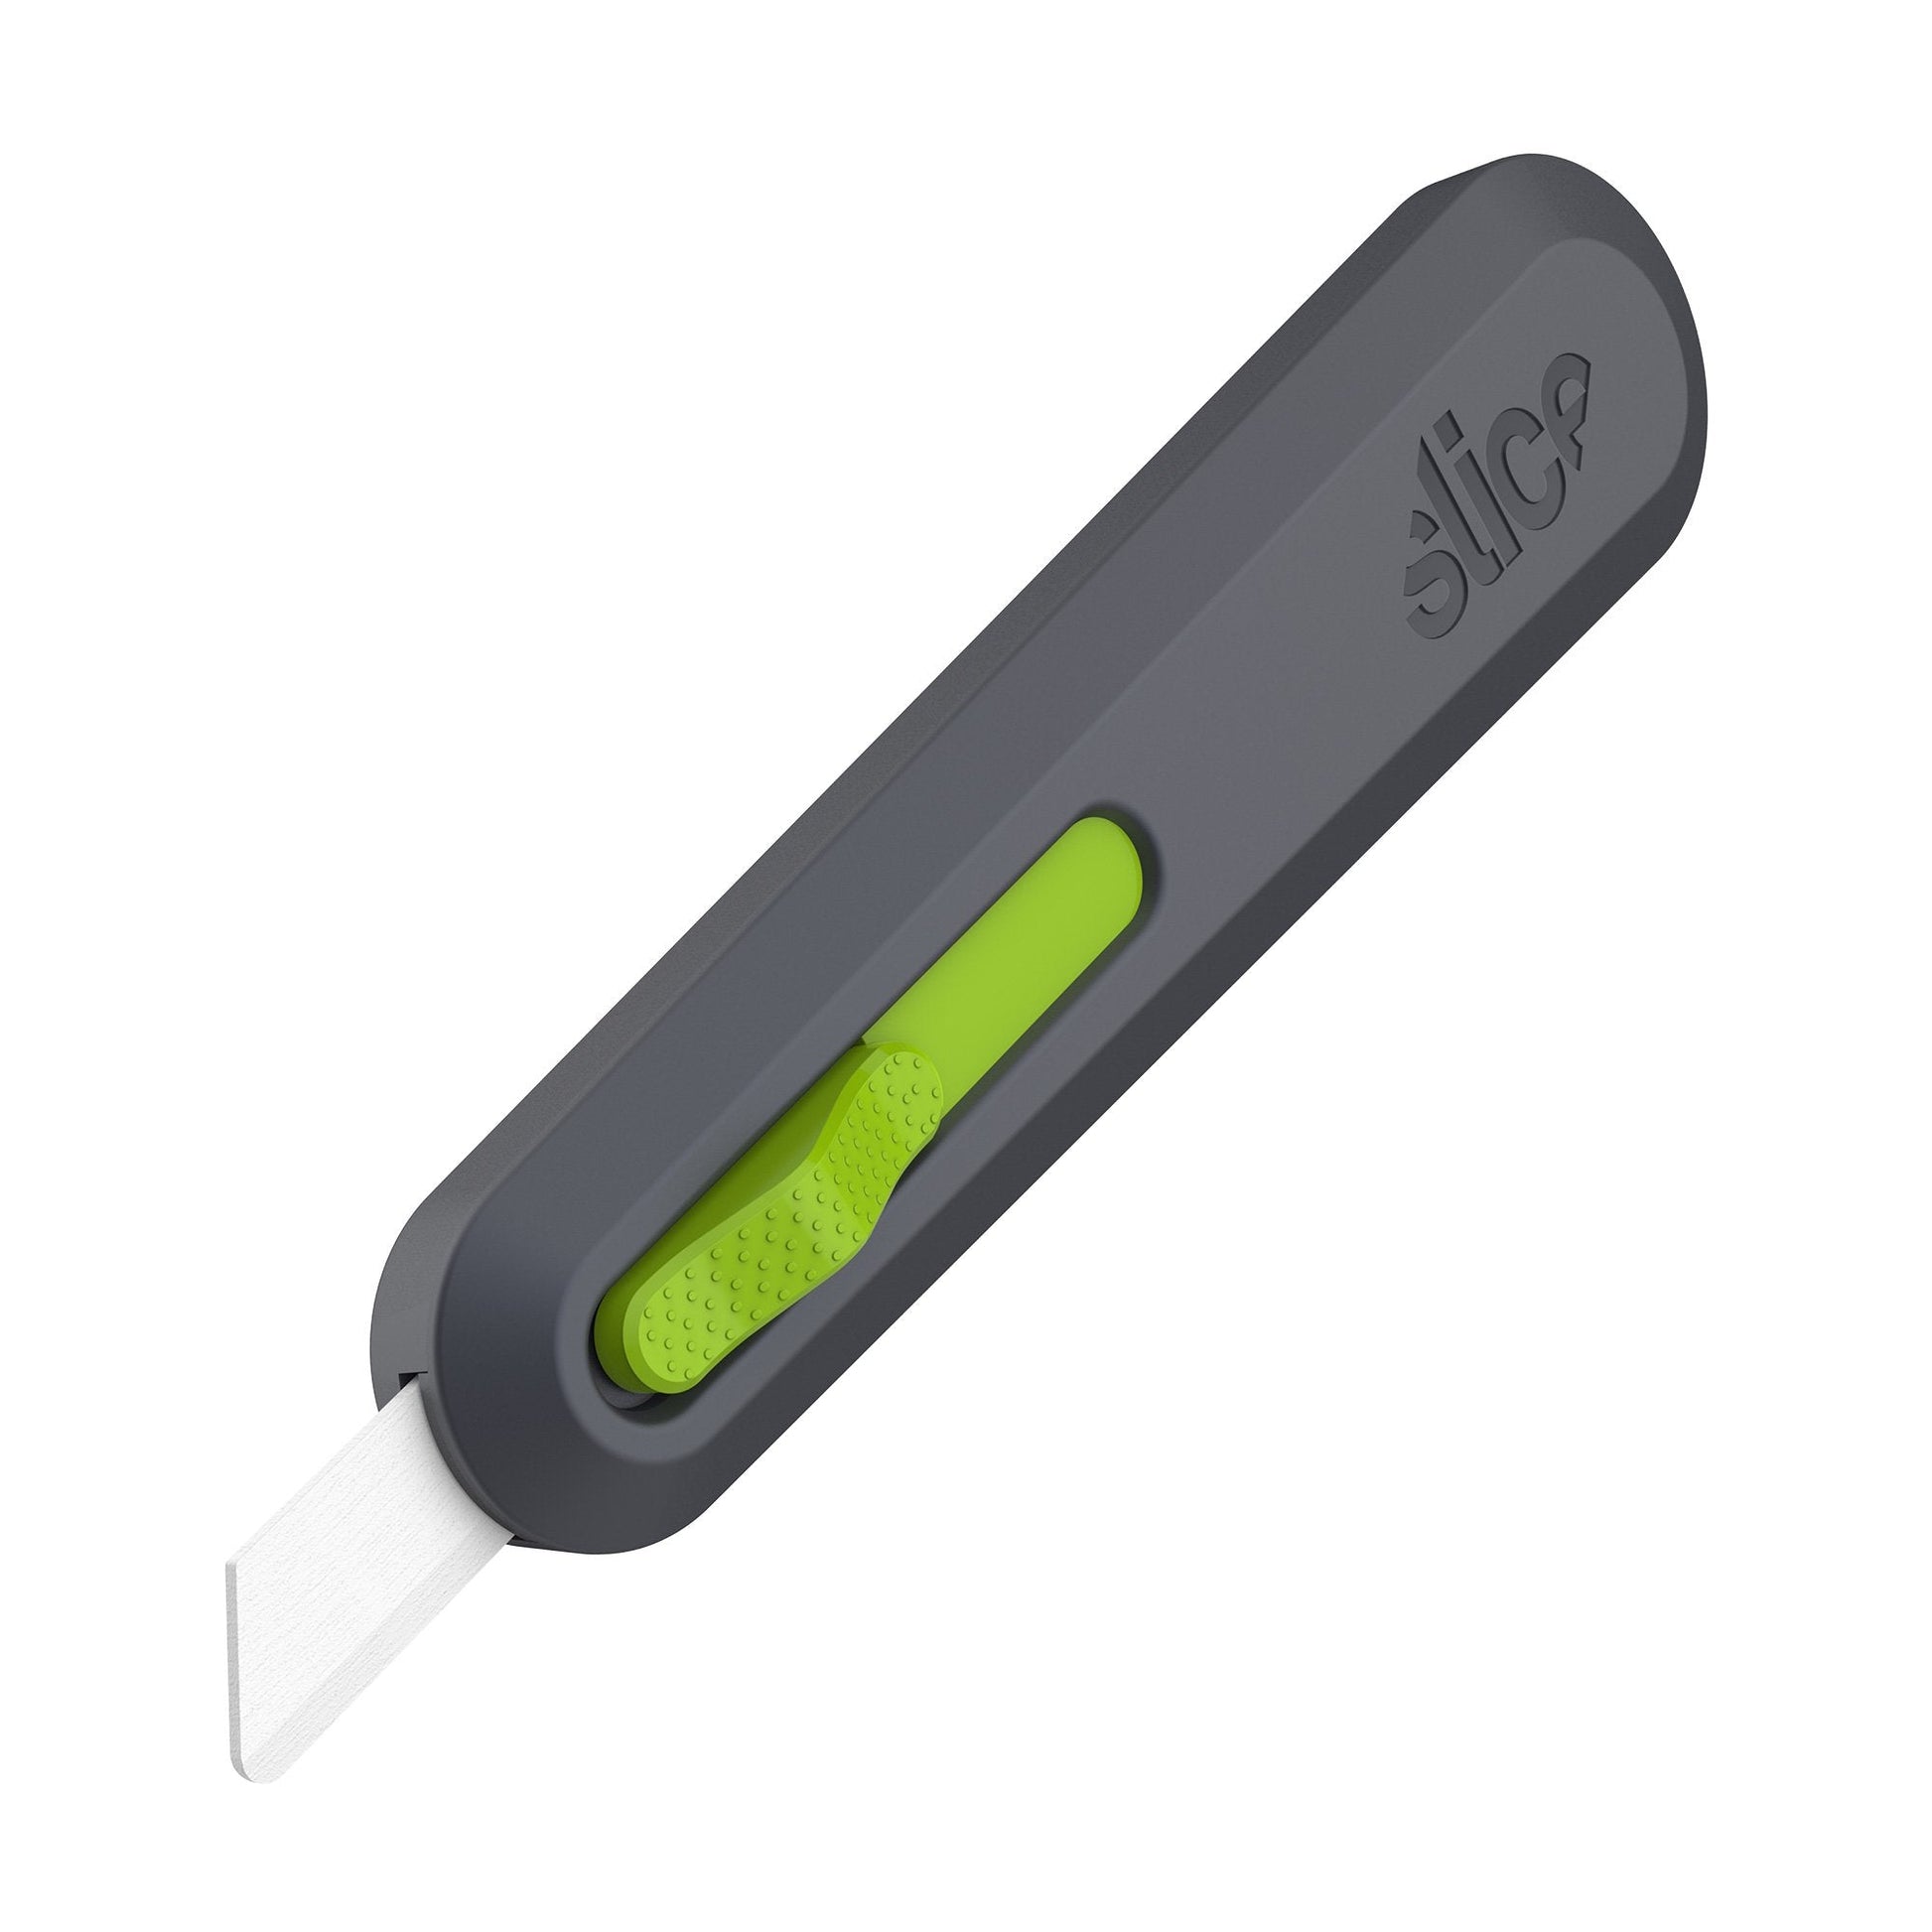 The Slice 10554 Auto-Retractable Utility Knife with ceramic safety blade